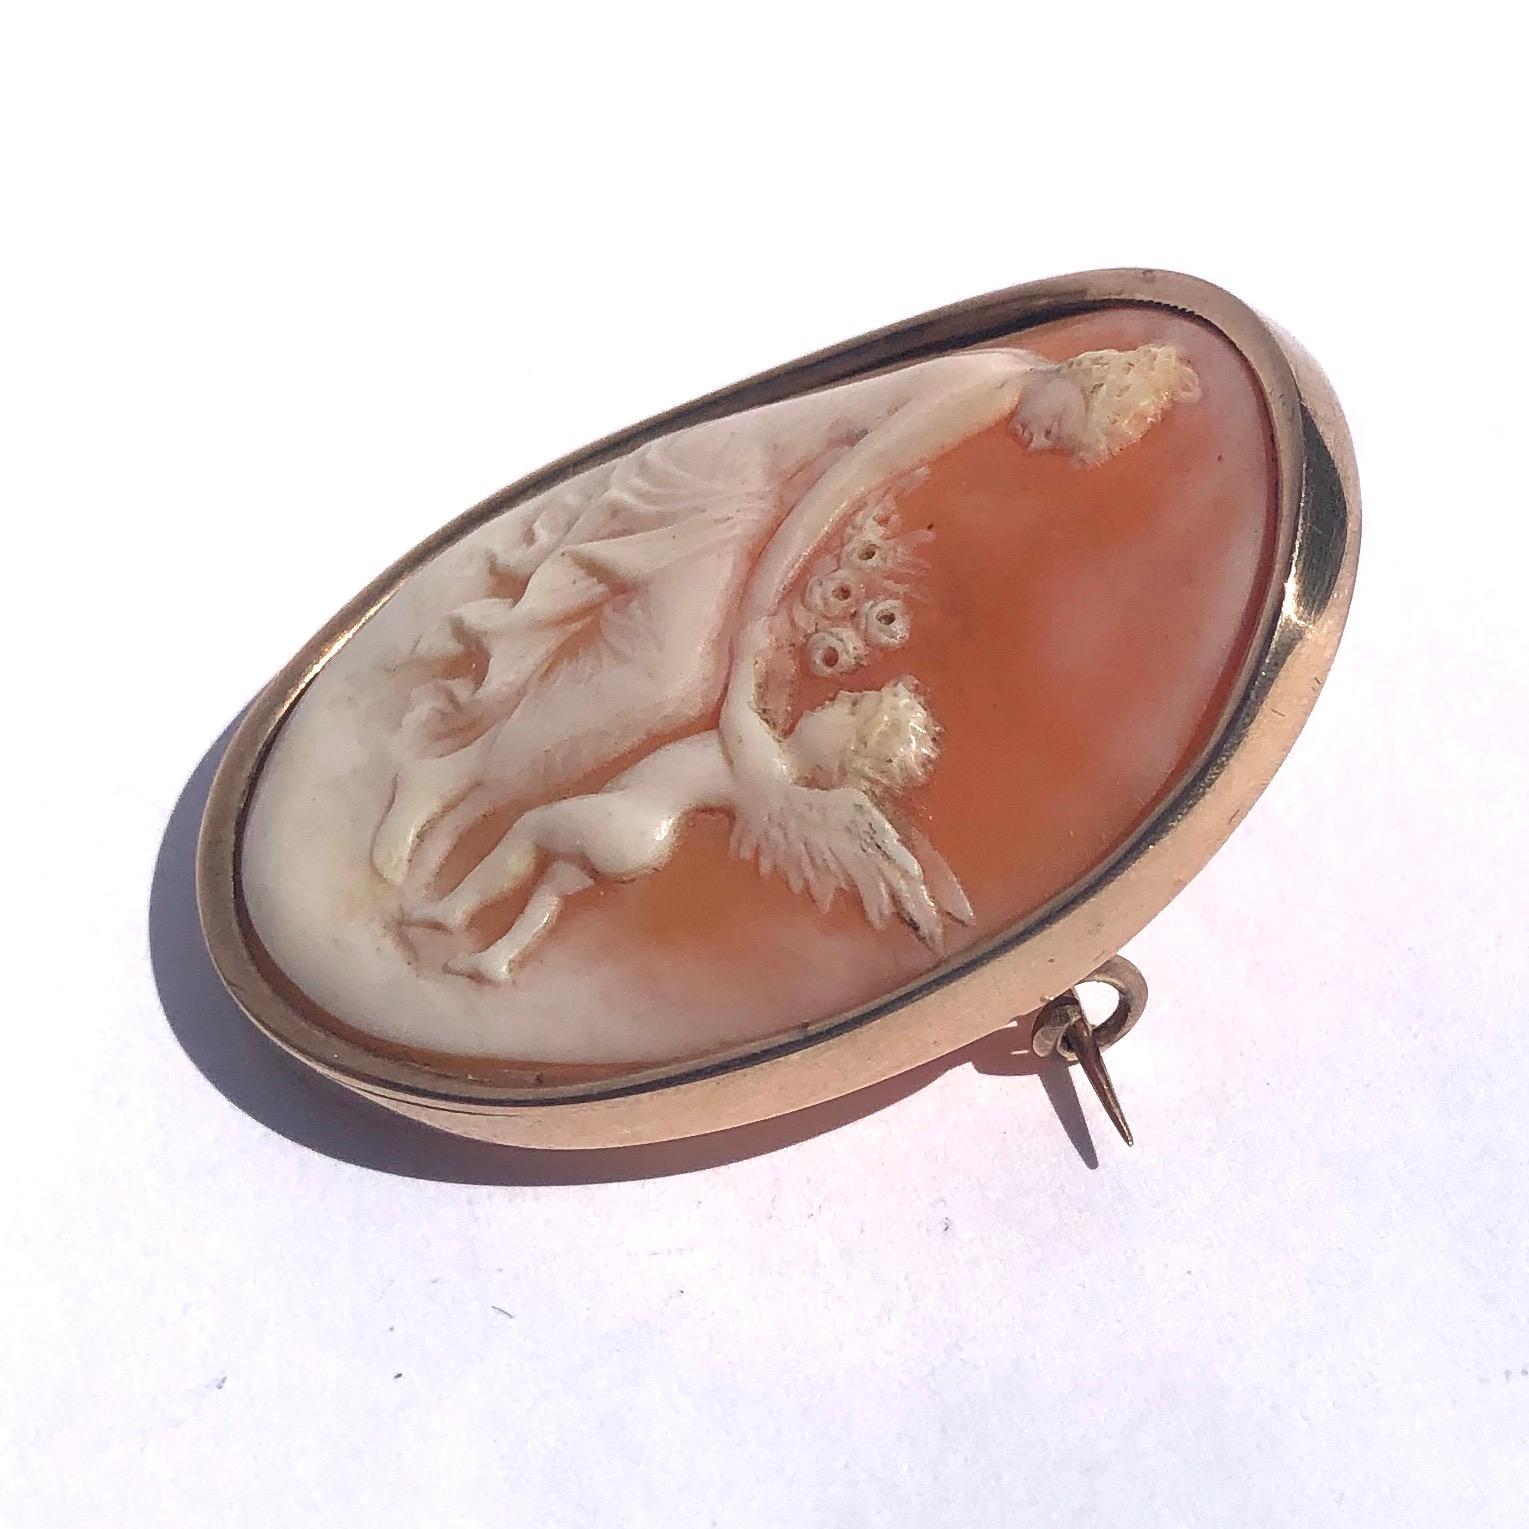 The sweet image on this delicately carved cameo brooch is of a cherub gifting flowers to a lovely lady. The brooch is slightly curved which really makes the image stand out. 

Dimensions: 41x31mm 

Weight: 9.4g